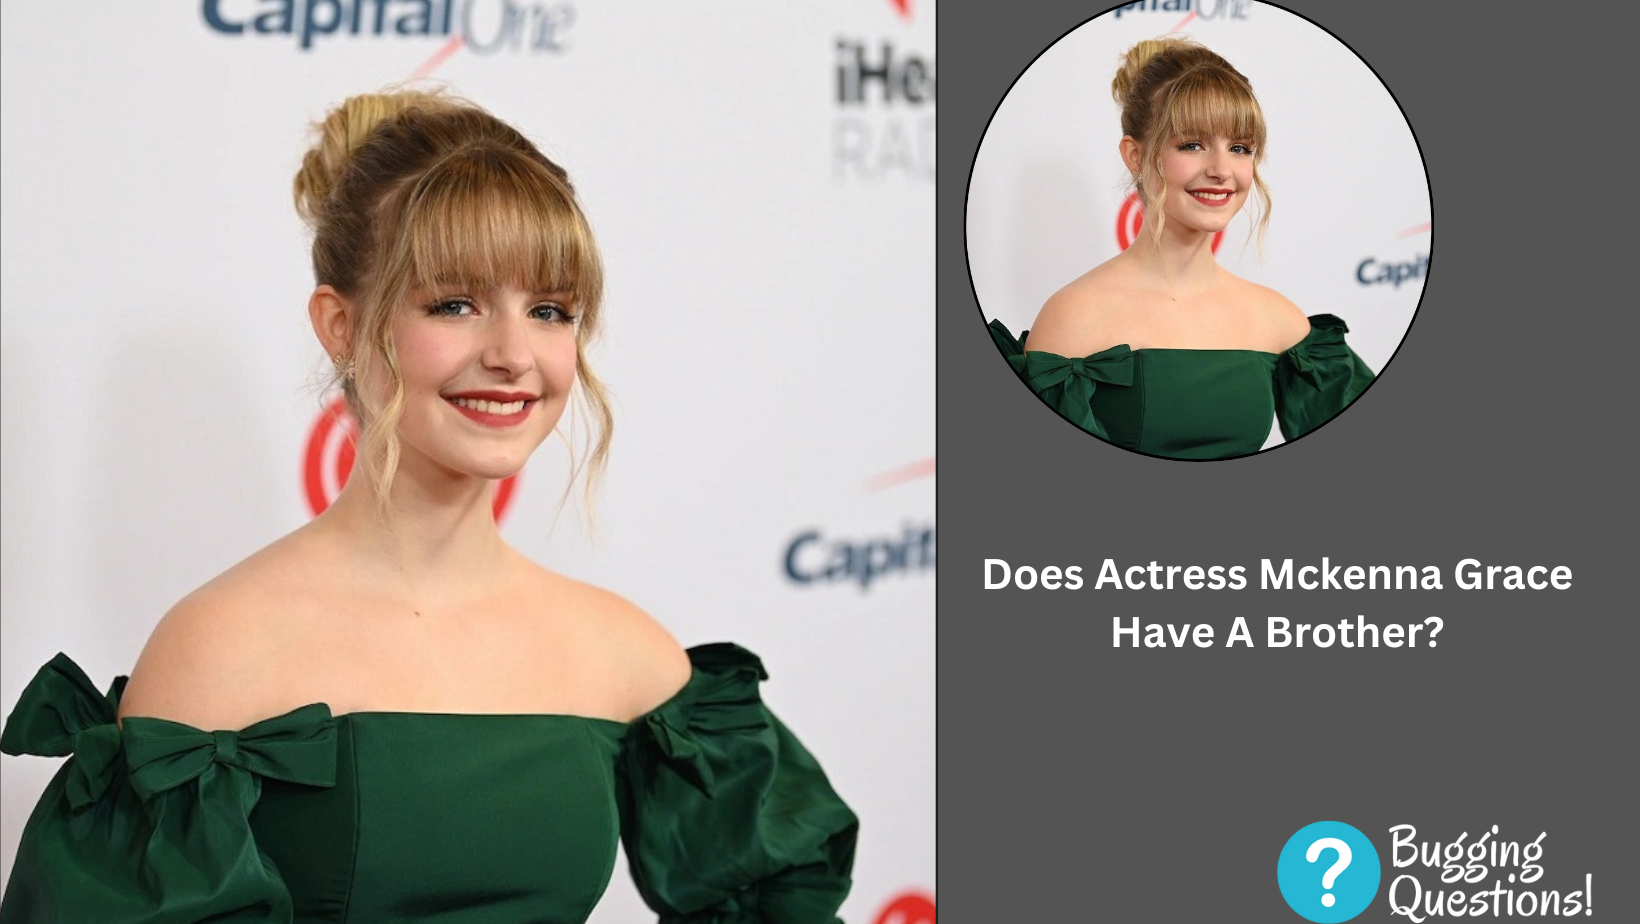 Does Actress Mckenna Grace Have A Brother?